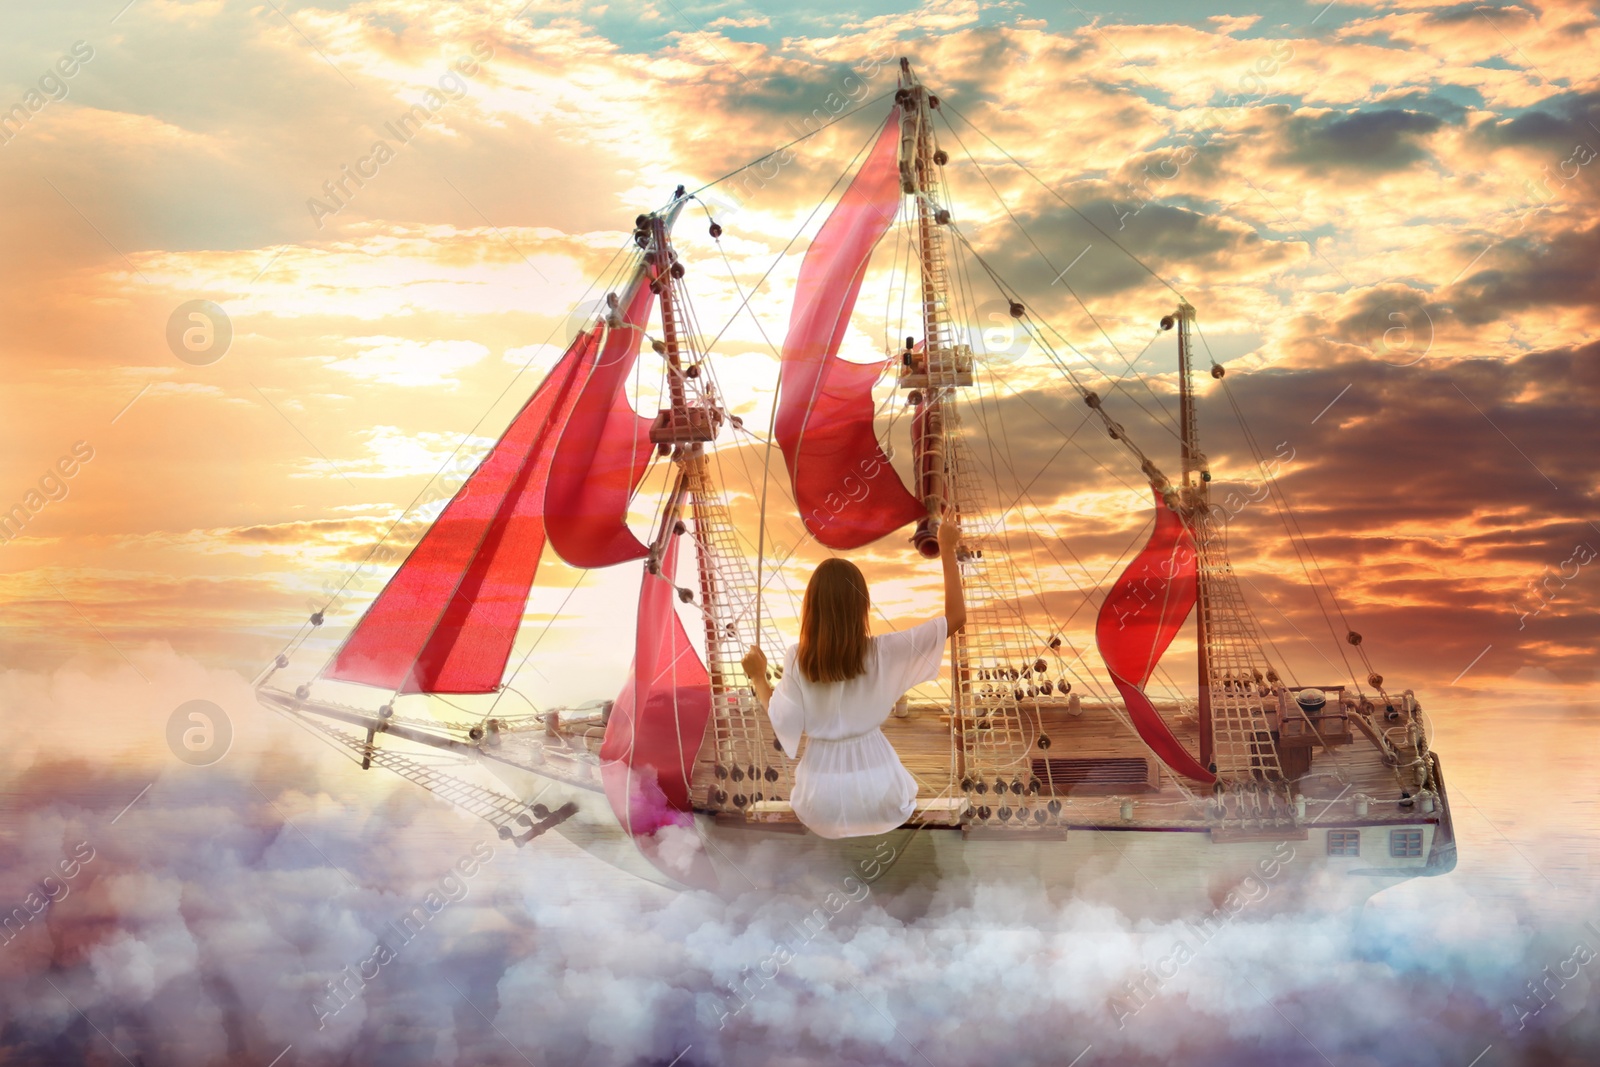 Image of Dream world. Sailing ship with beautiful girl on board floating among wonderful fluffy clouds